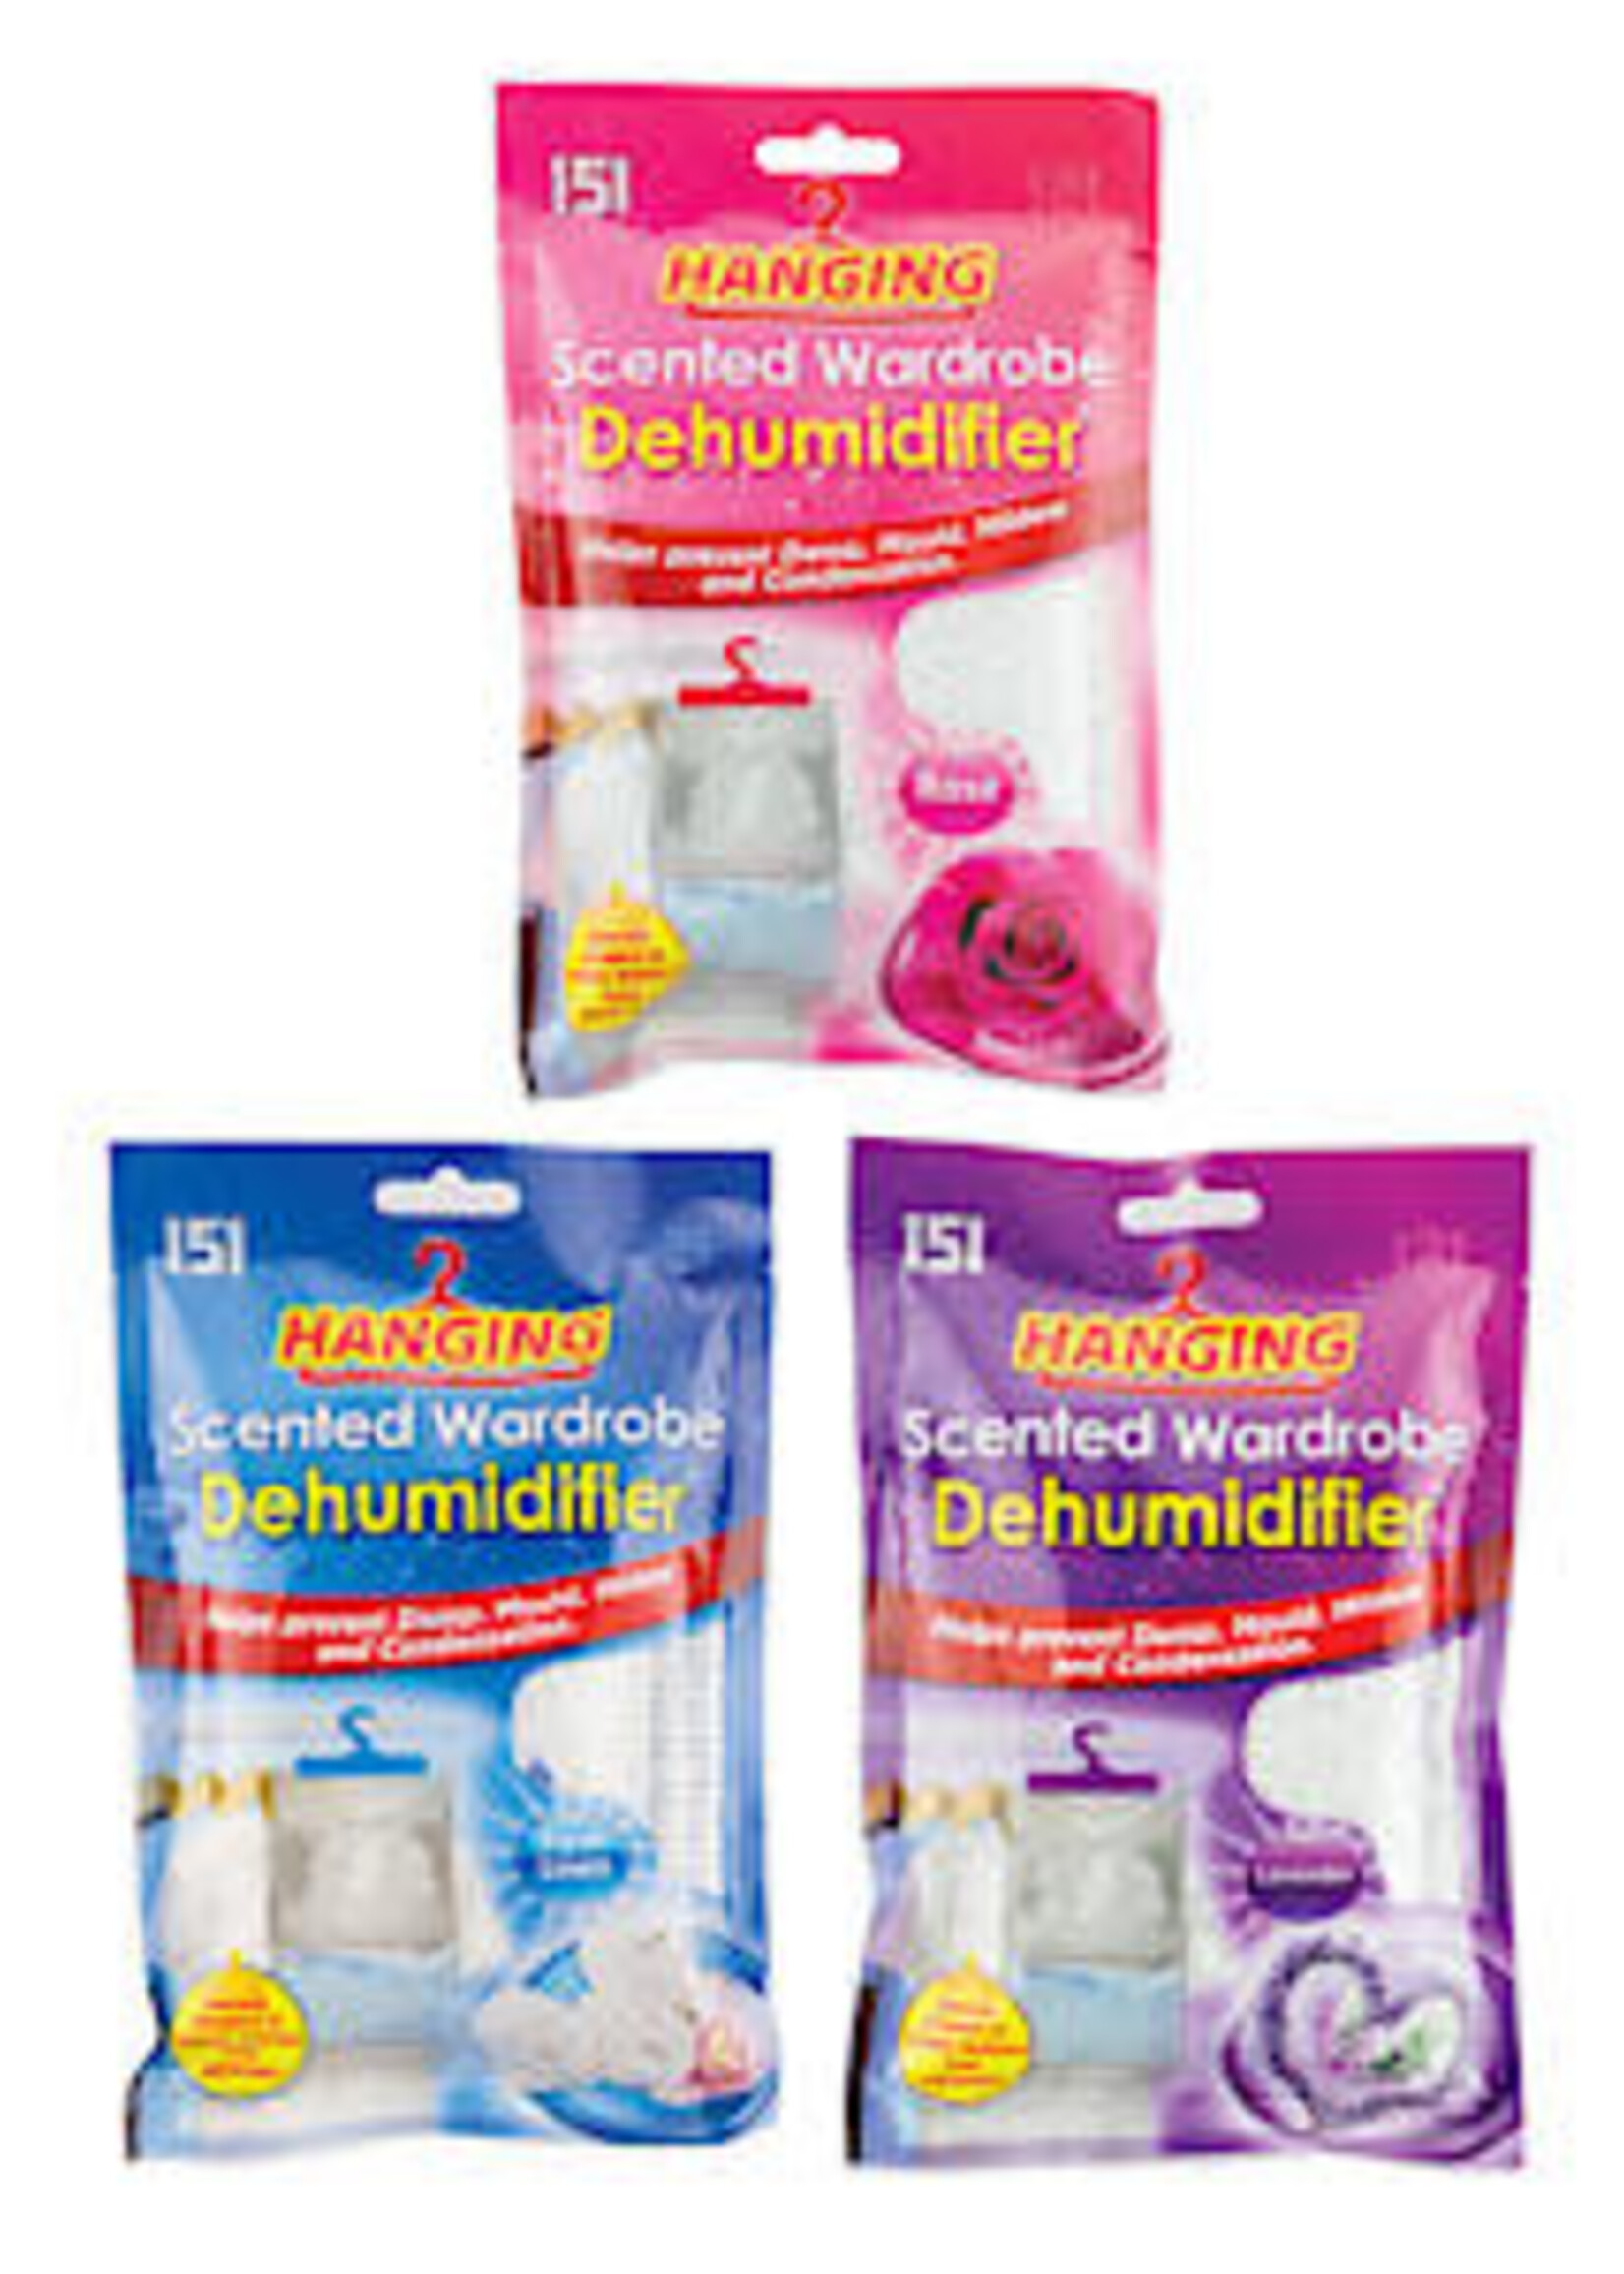 151 Hanging Wardrobe Dehumidifier Assorted Scents - price each - Clock's  Home and Garden